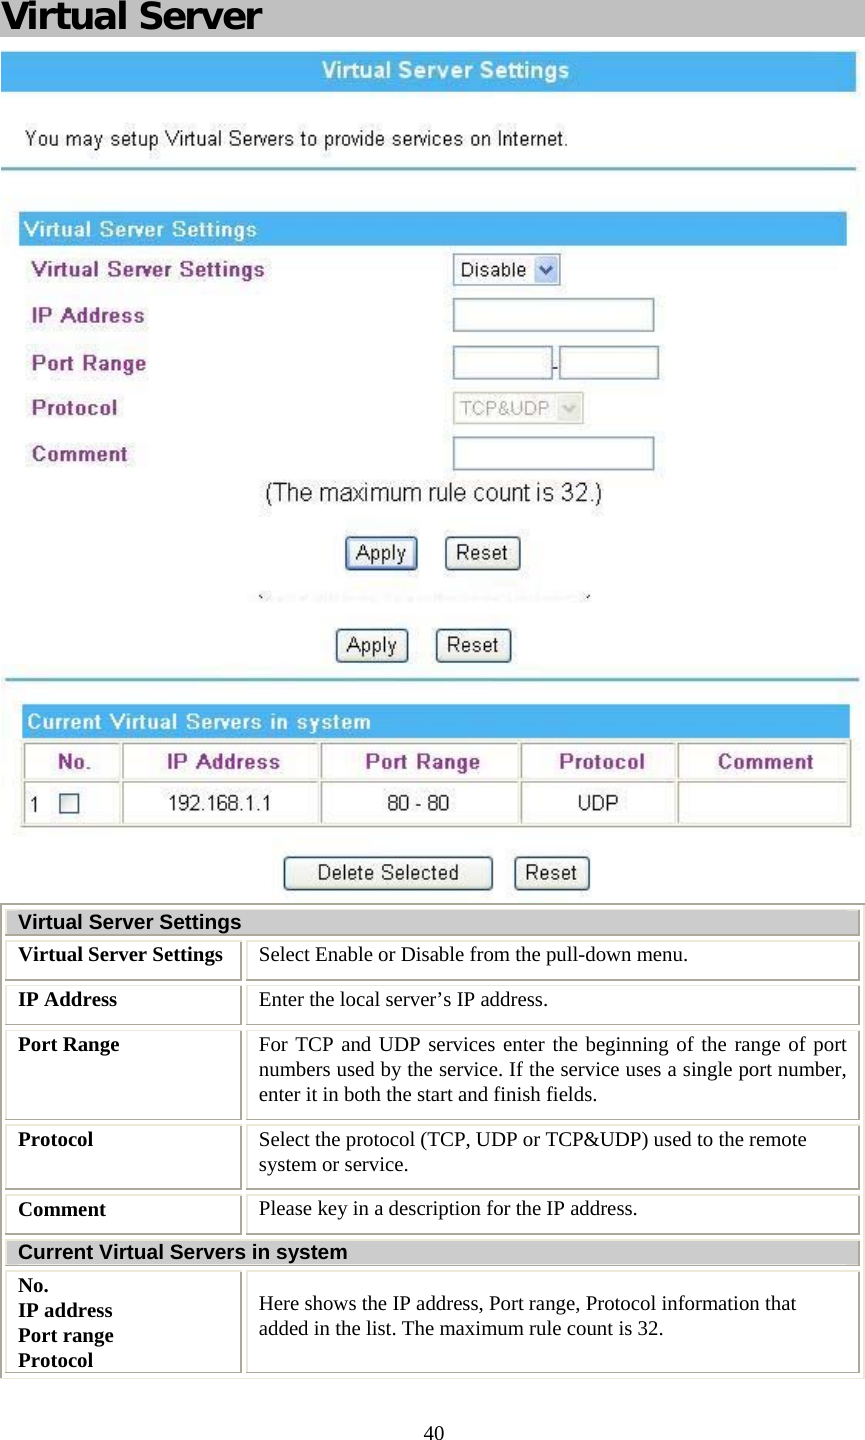   40  Virtual Server  Virtual Server Settings Virtual Server Settings  Select Enable or Disable from the pull-down menu. IP Address  Enter the local server’s IP address. Port Range  For TCP and UDP services enter the beginning of the range of port numbers used by the service. If the service uses a single port number, enter it in both the start and finish fields. Protocol  Select the protocol (TCP, UDP or TCP&amp;UDP) used to the remote system or service. Comment  Please key in a description for the IP address. Current Virtual Servers in system No.  IP address Port range Protocol Here shows the IP address, Port range, Protocol information that added in the list. The maximum rule count is 32. 